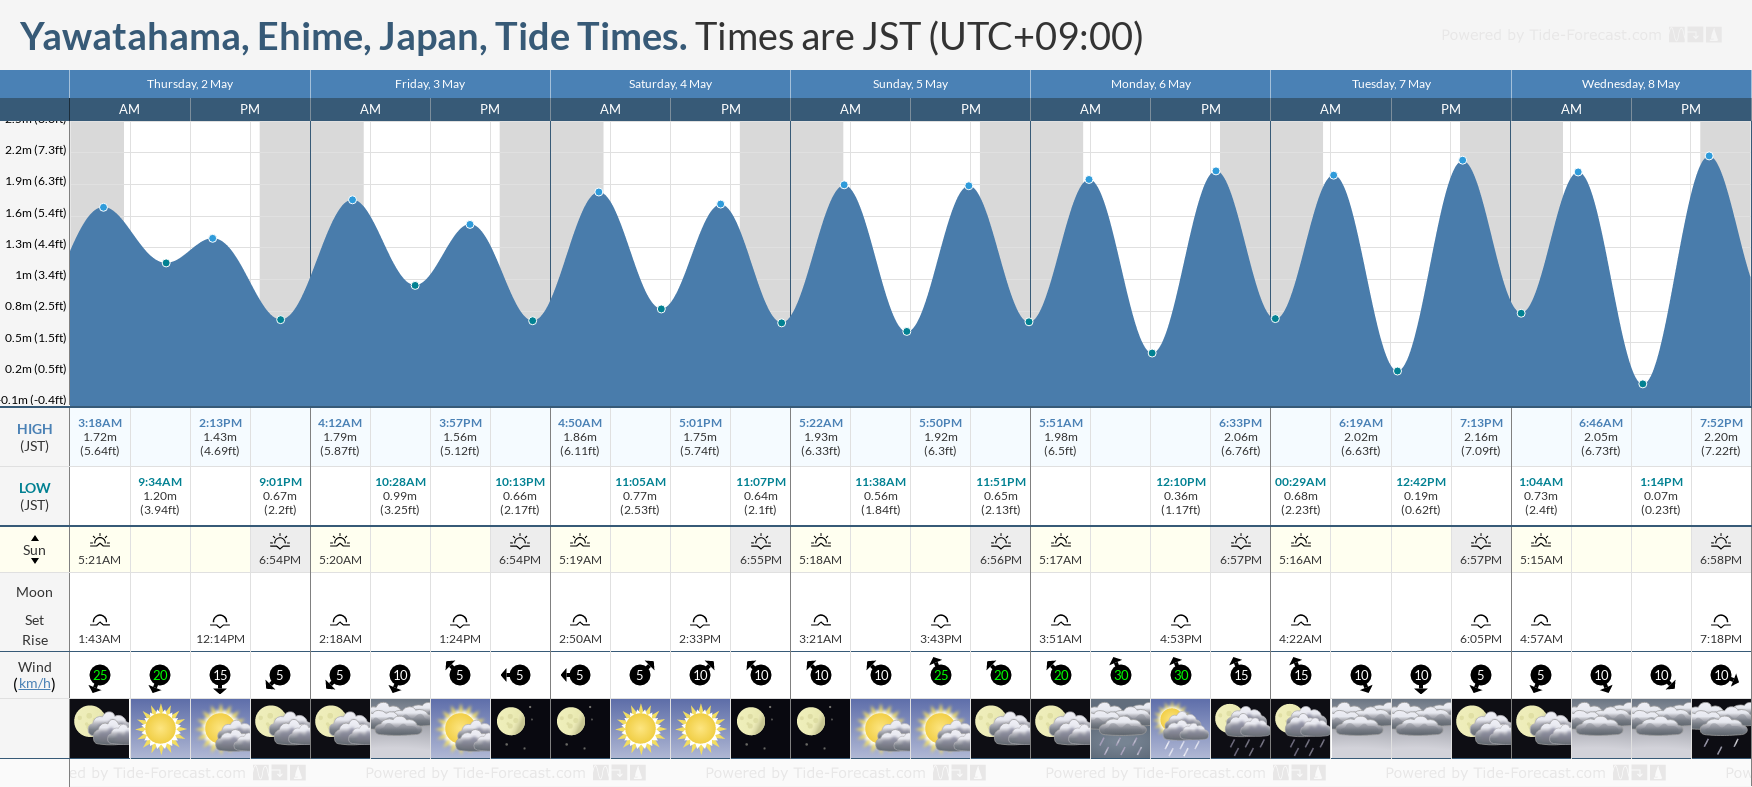 Yawatahama, Ehime, Japan Tide Chart including high and low tide tide times for the next 7 days